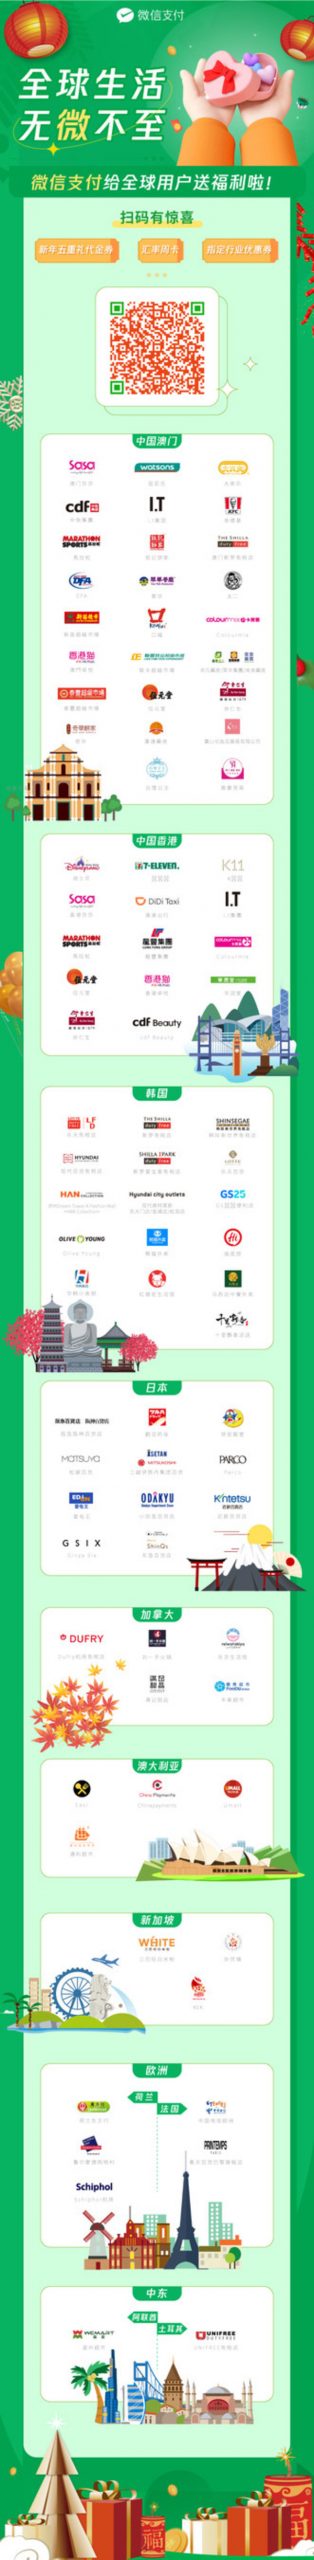 Incredible Offers for Weixin Pay Users in Nearly One Million Merchants Worldwide